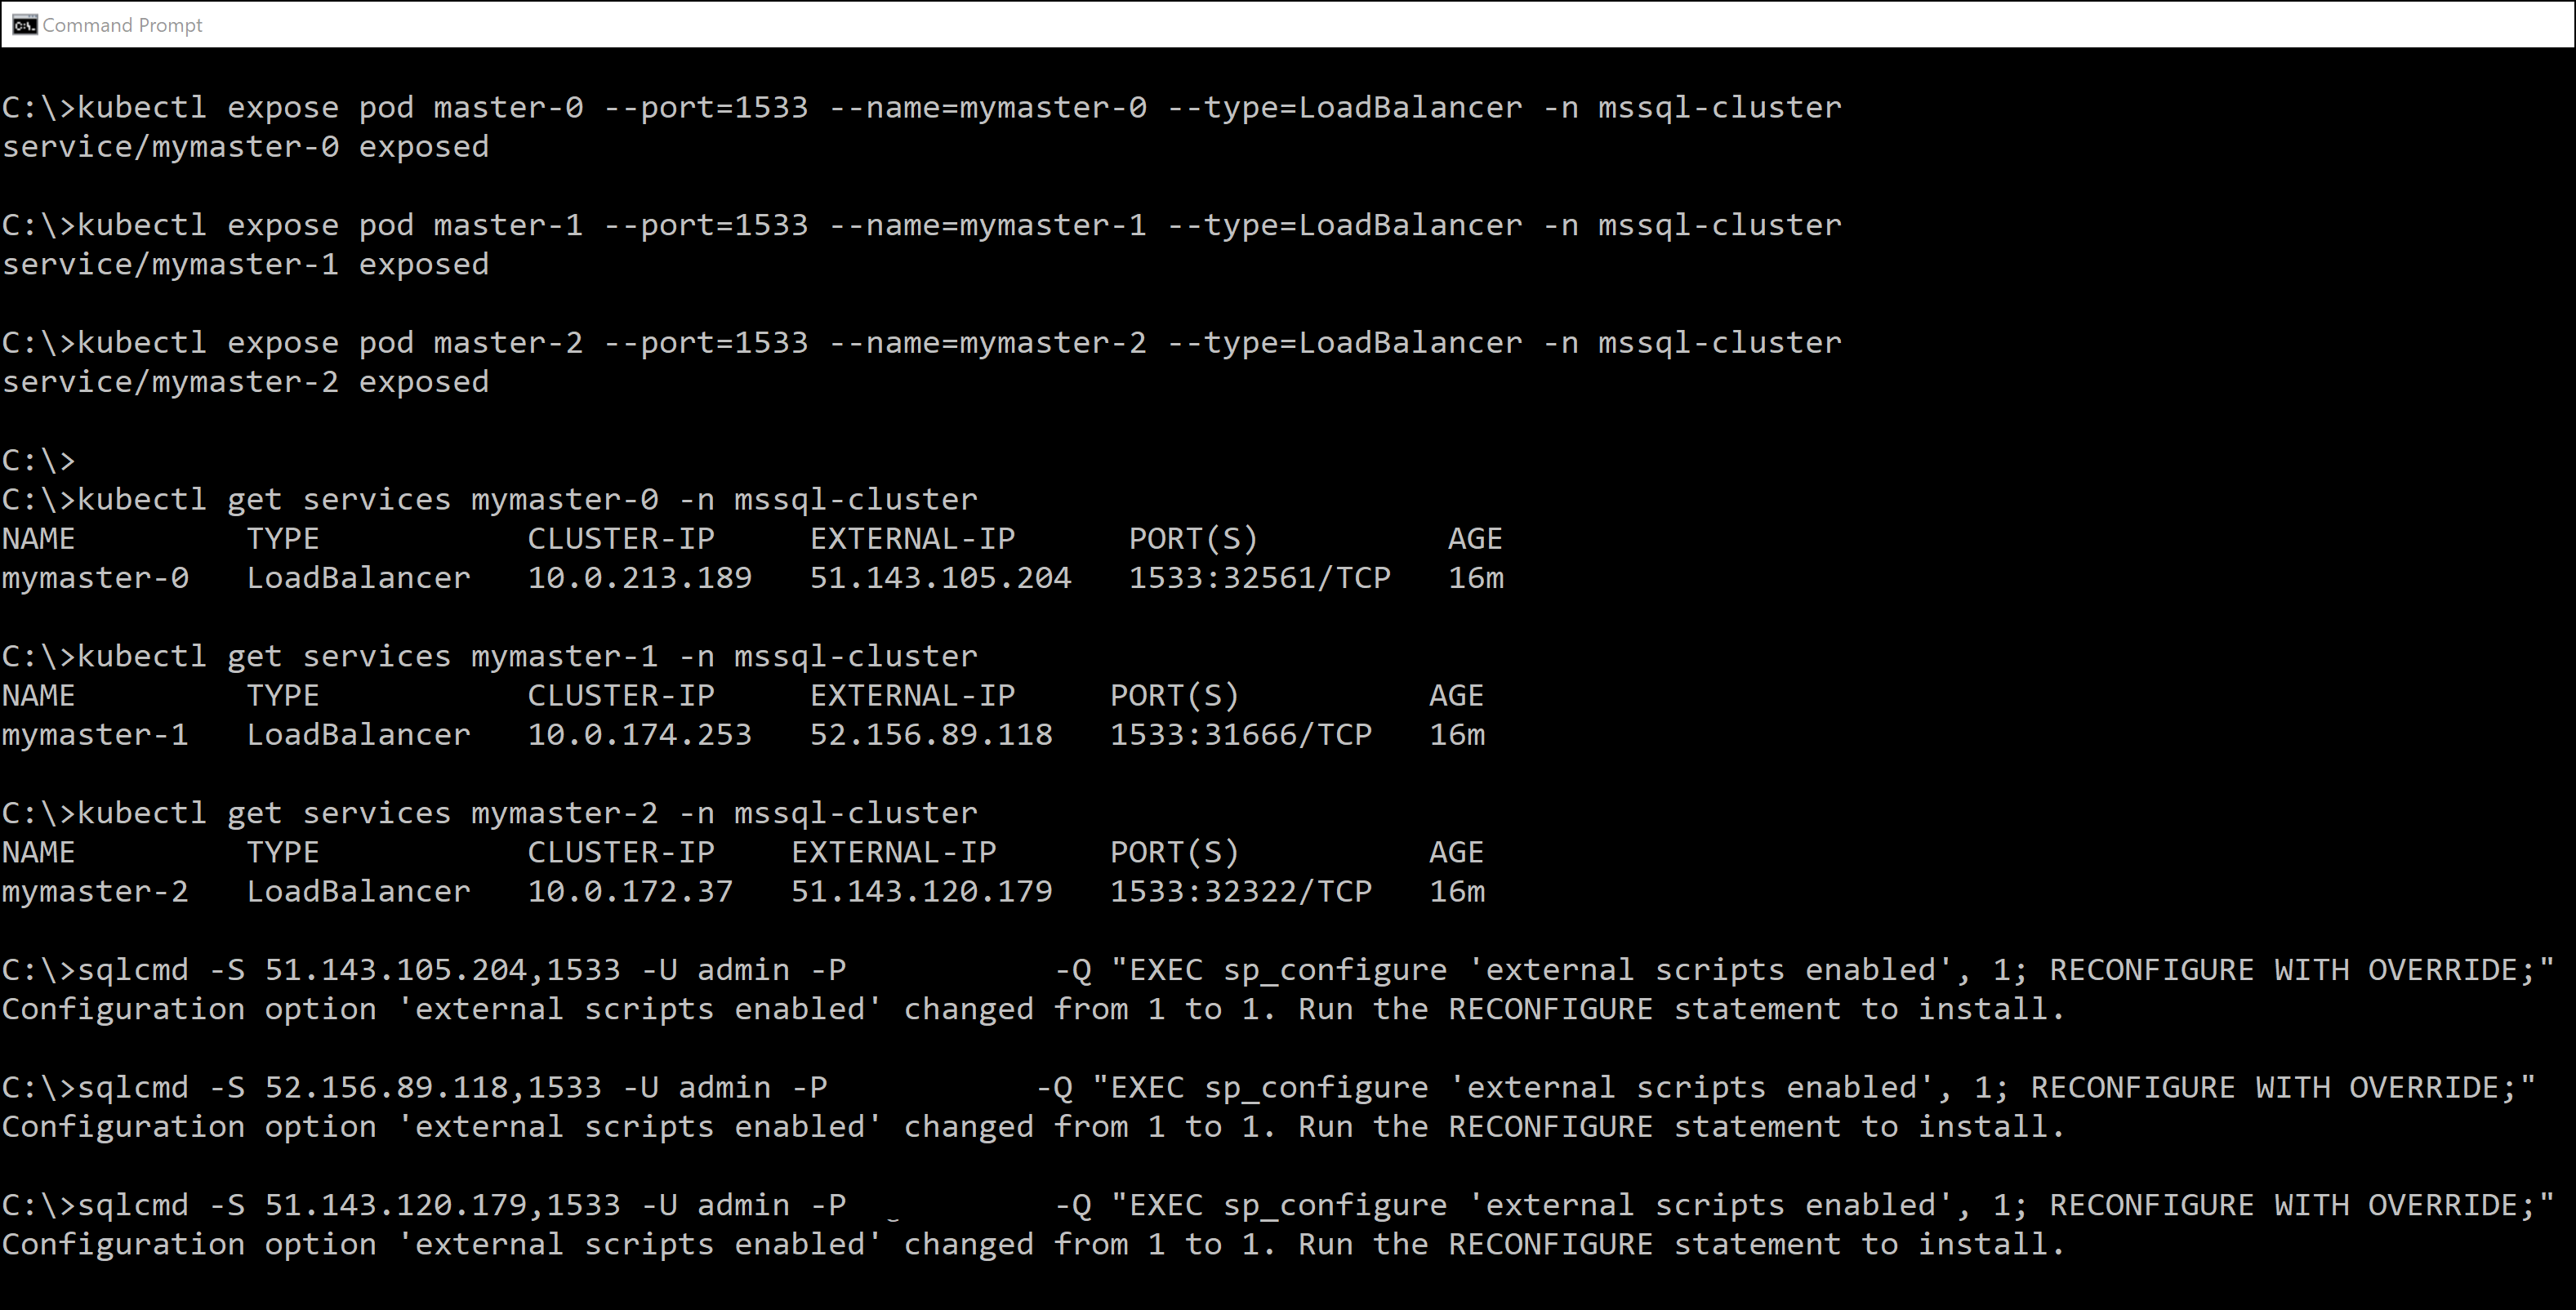 A screenshot of the command prompt providing a demo of the steps necessary to enable external scripts.